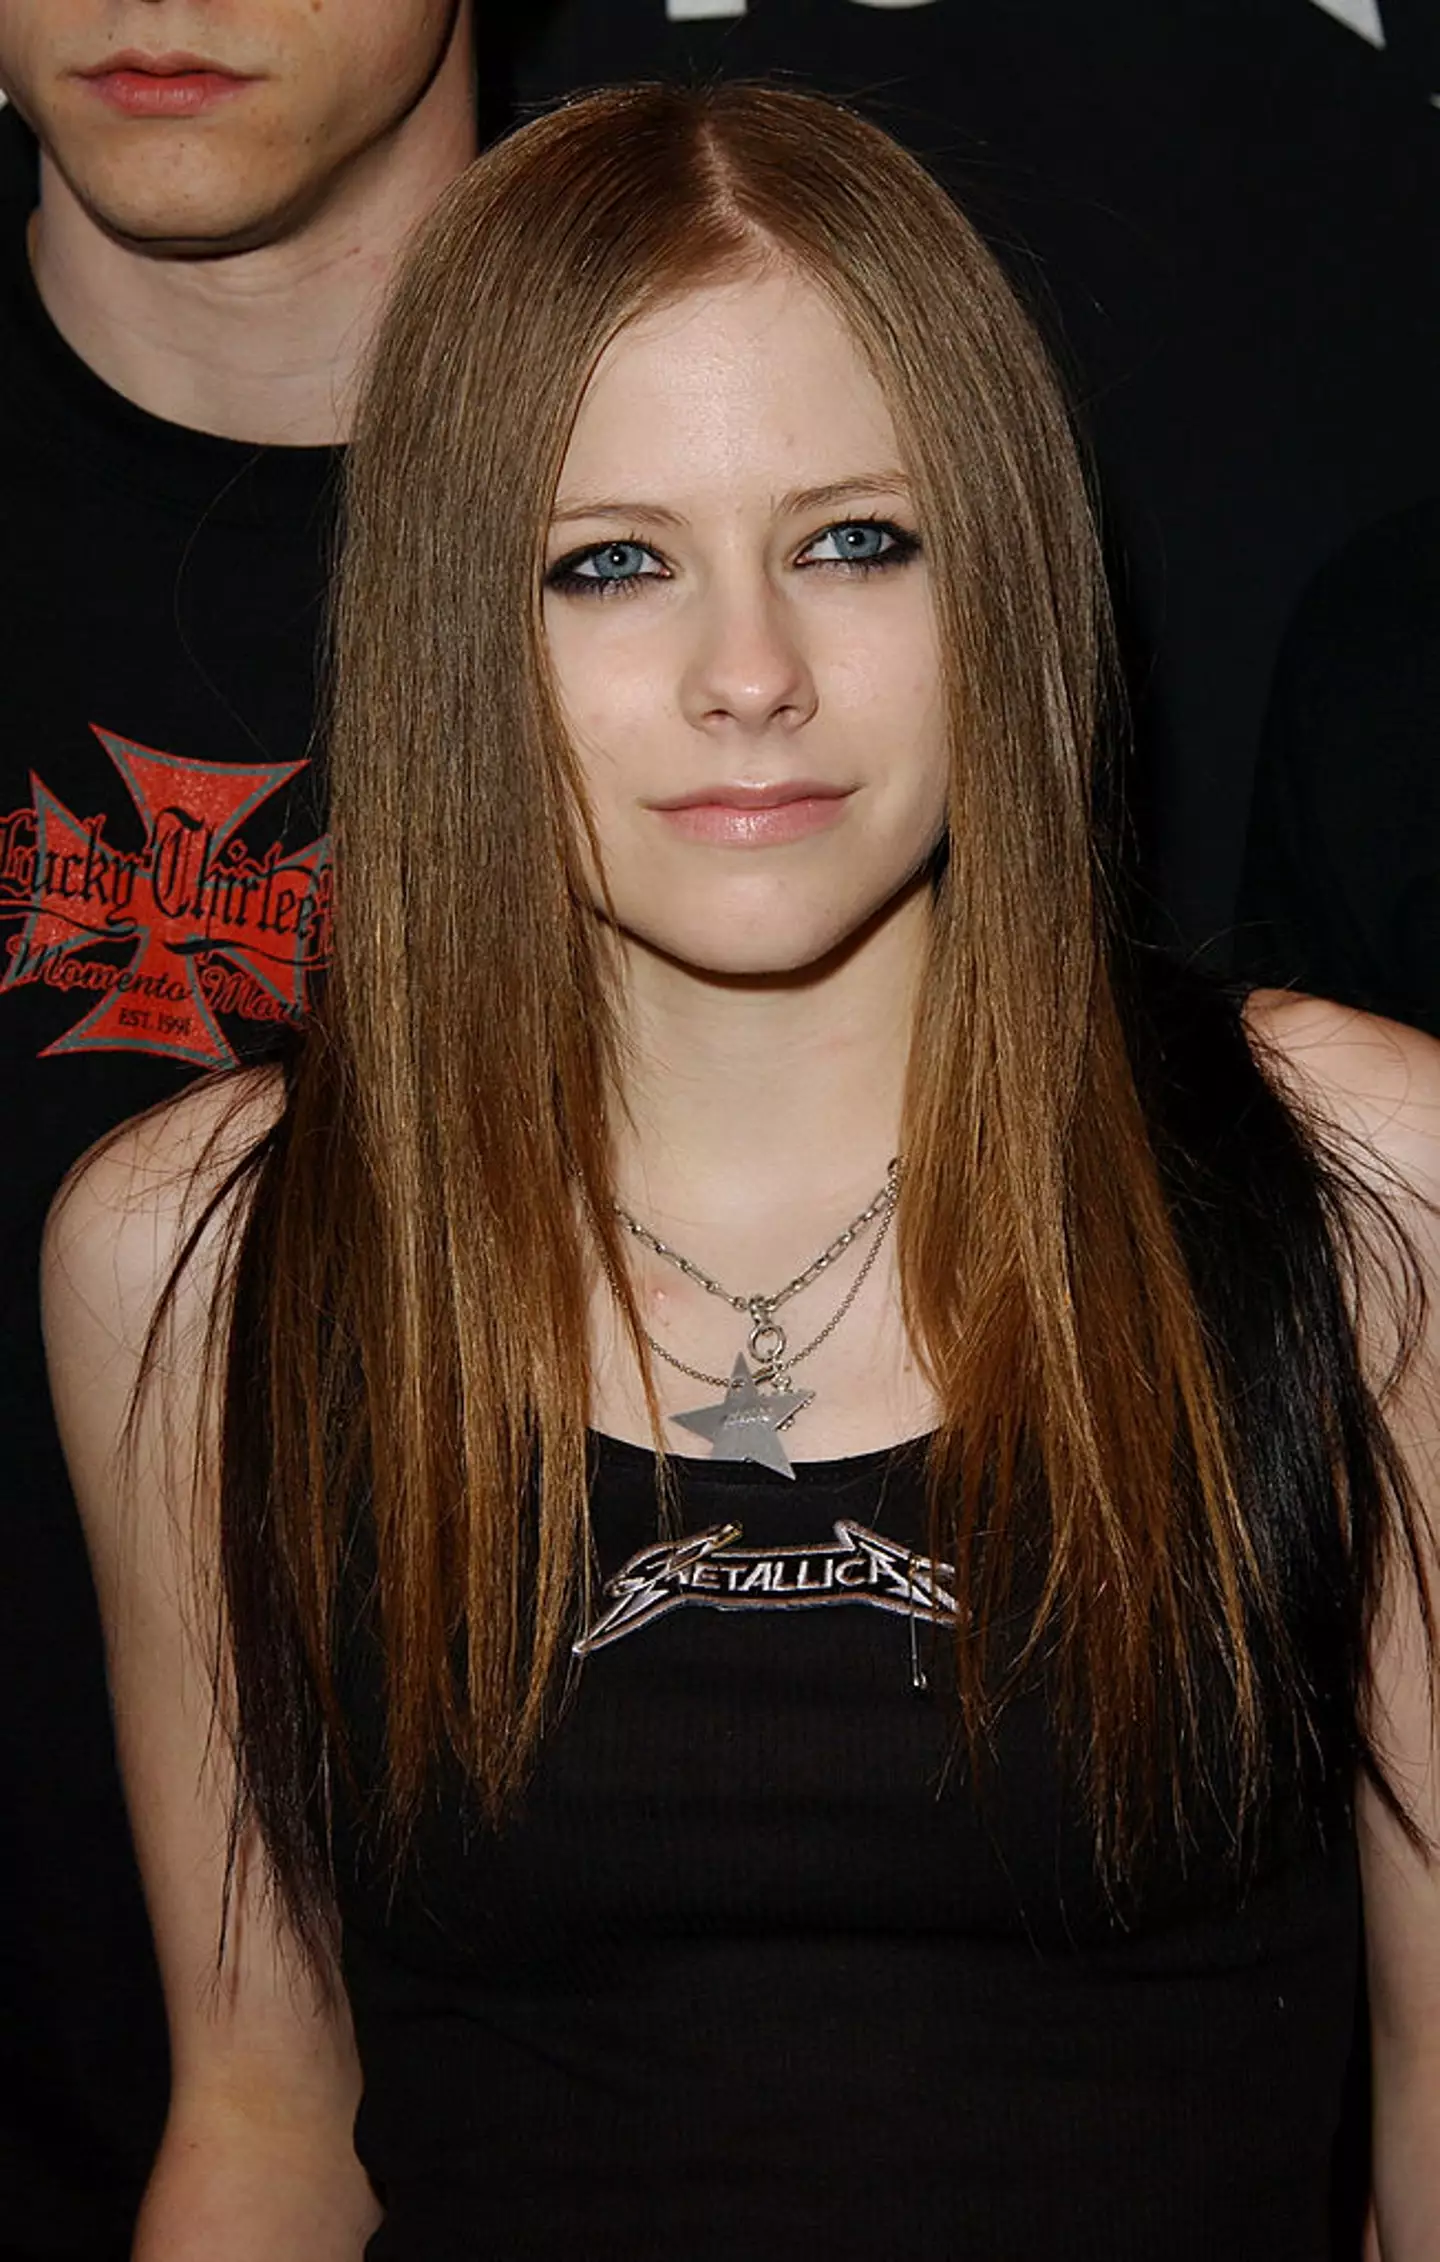 Some fans reckon Avril Lavigne died in the 2000s and was replaced by a lookalike. (Jon Kopaloff / Contributor / Getty Imagery)